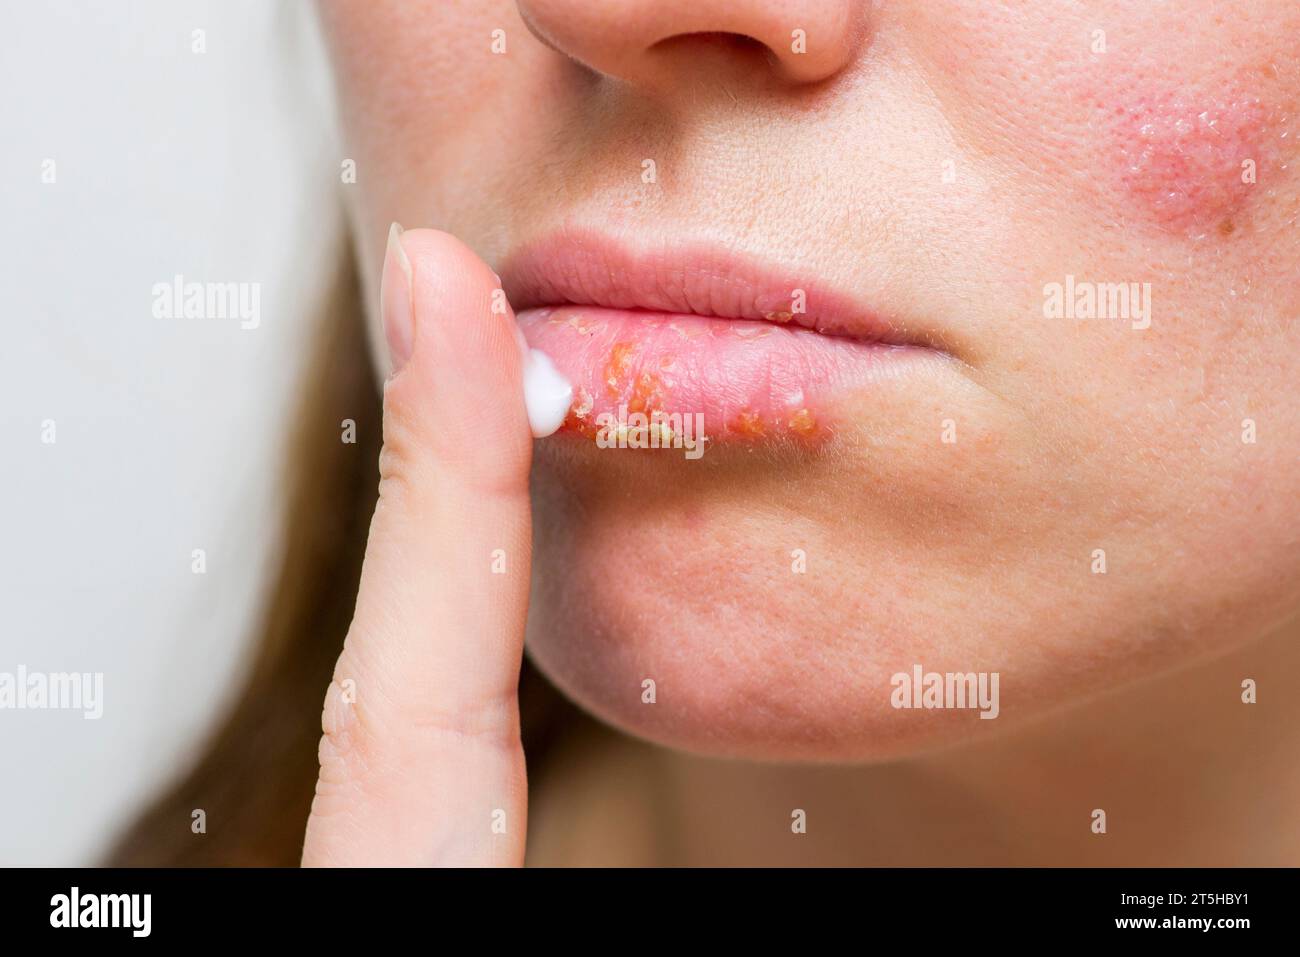 Young woman with cold sore applying cream on lips.  Stock Photo